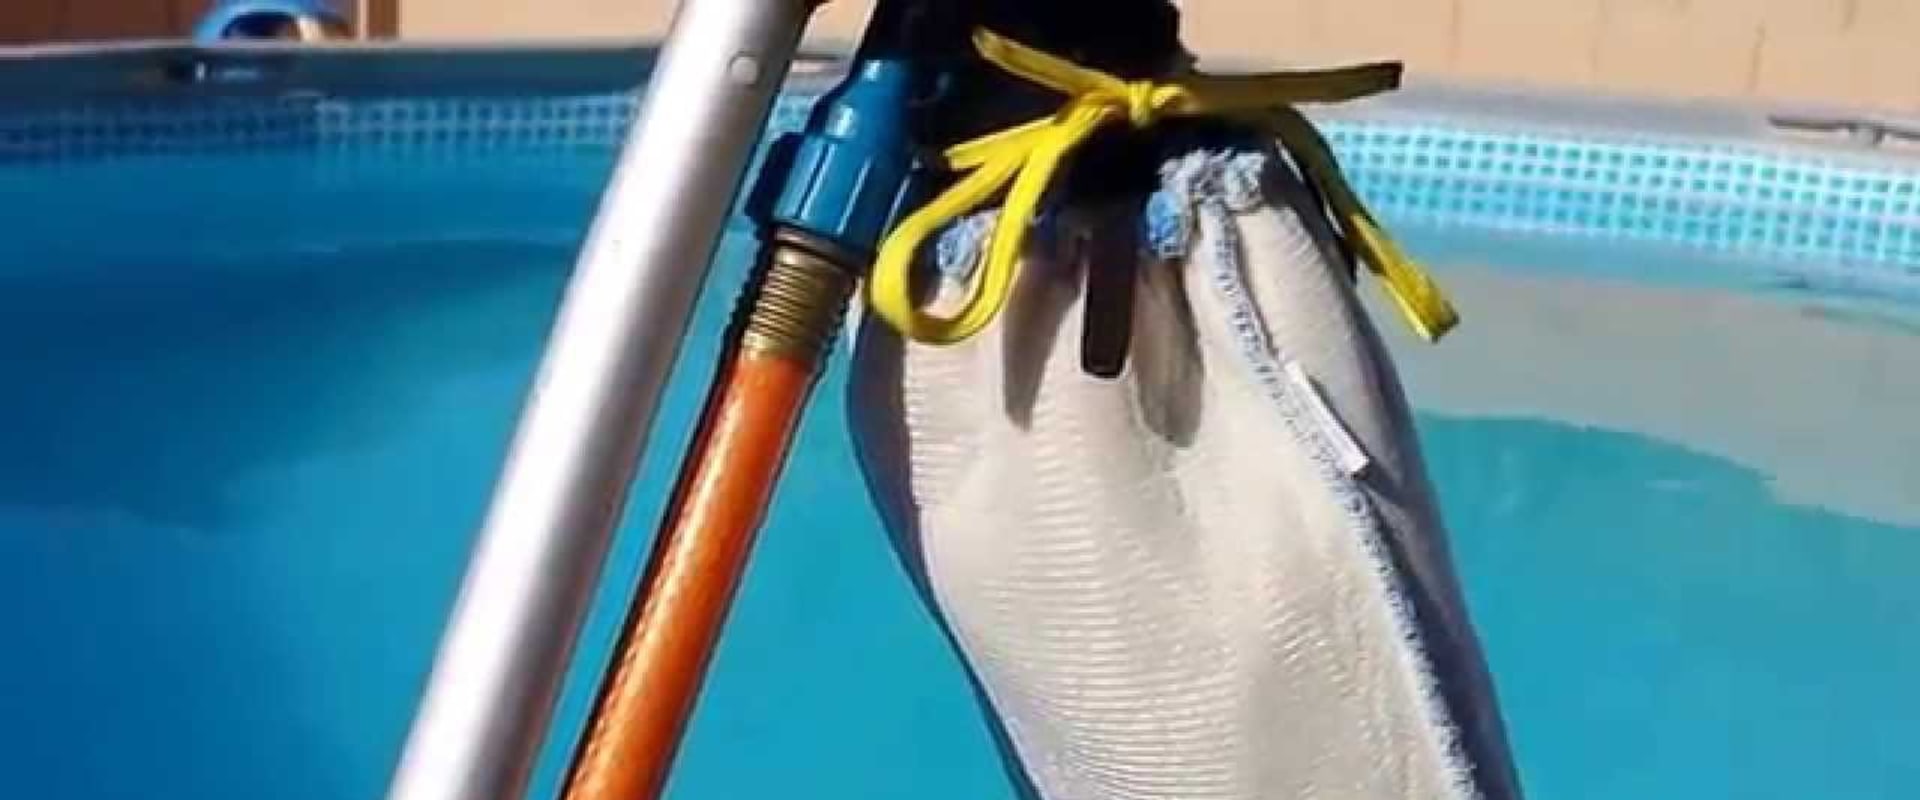 Vacuuming Debris from the Bottom of a Pool